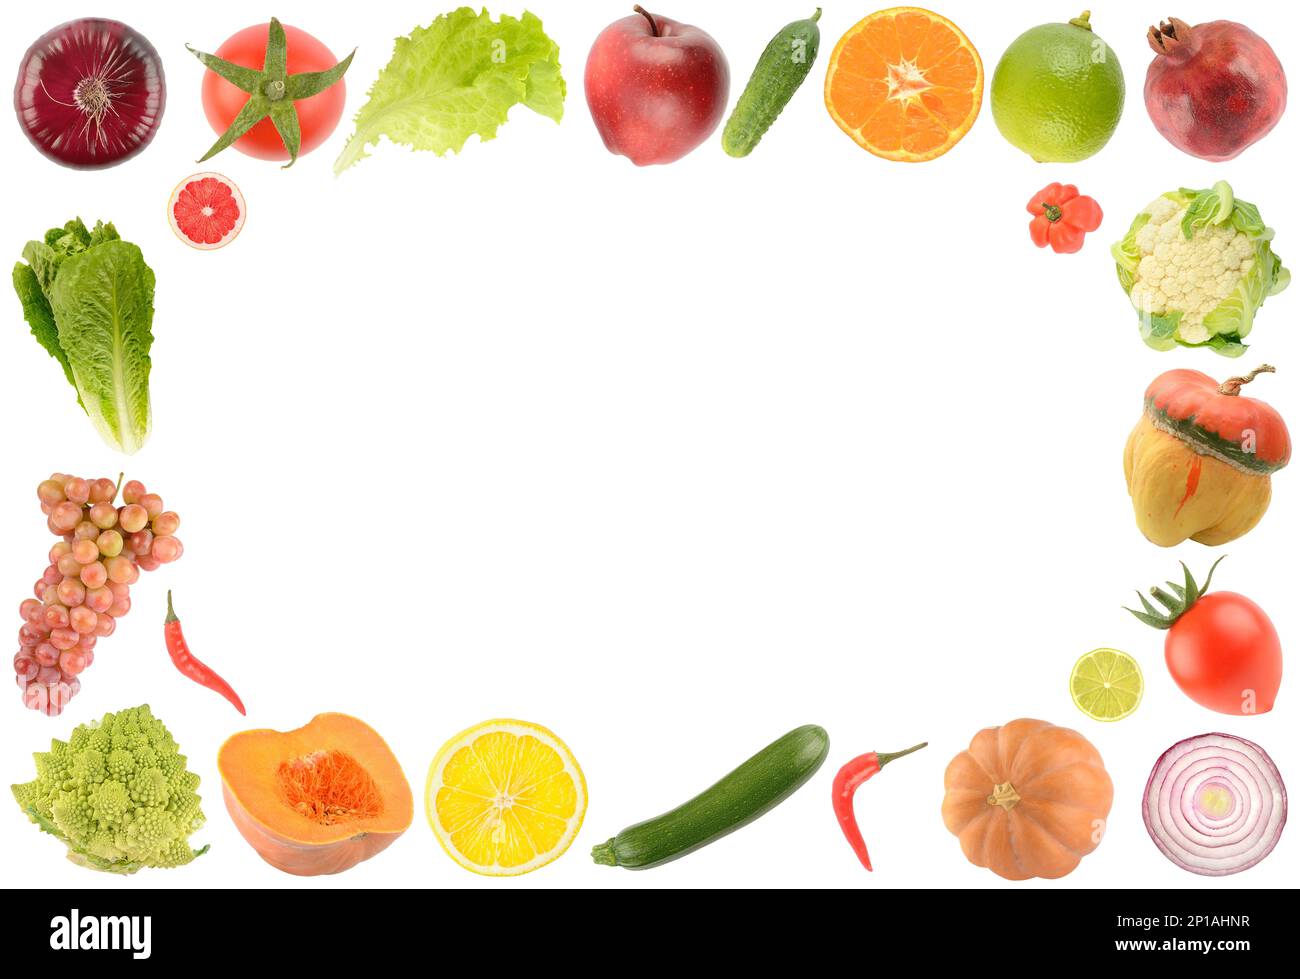 Frame fresh fruits, vegetables and berries isolated on white background. Free space for text. Stock Photo